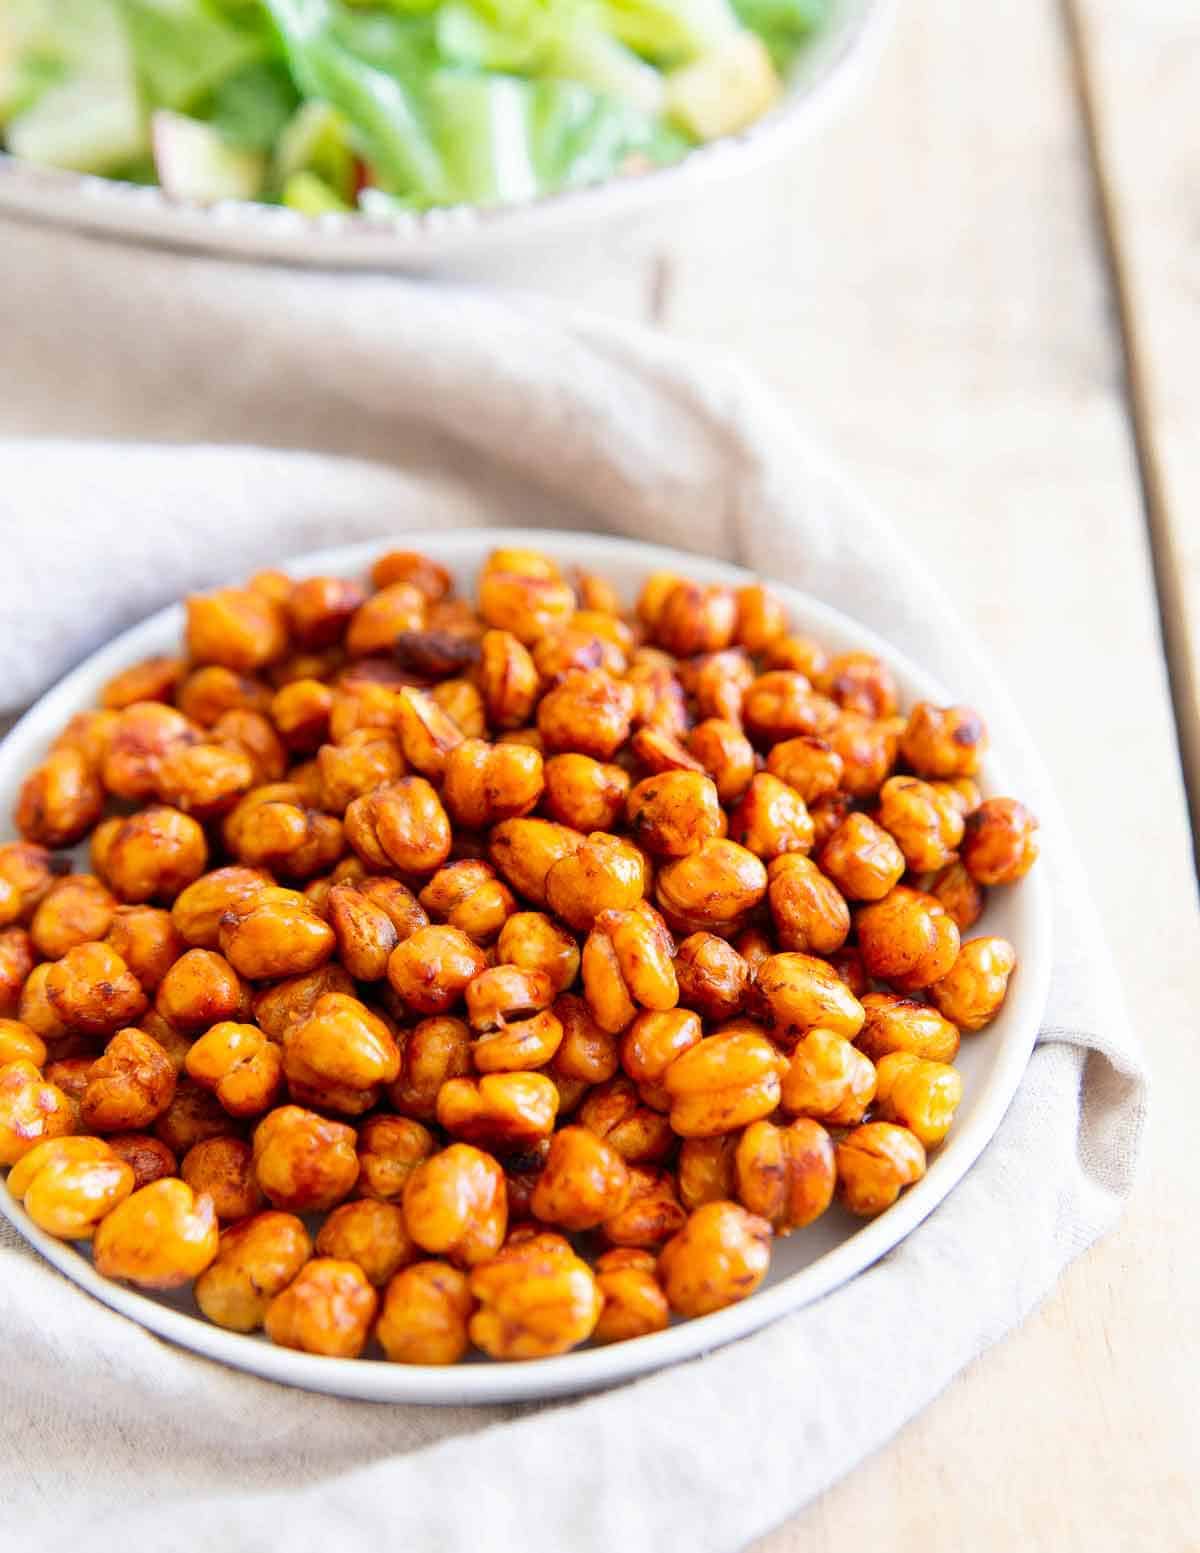 BBQ sauce and this simple roasting method results in these super easy BBQ chickpeas - perfect for snacking!